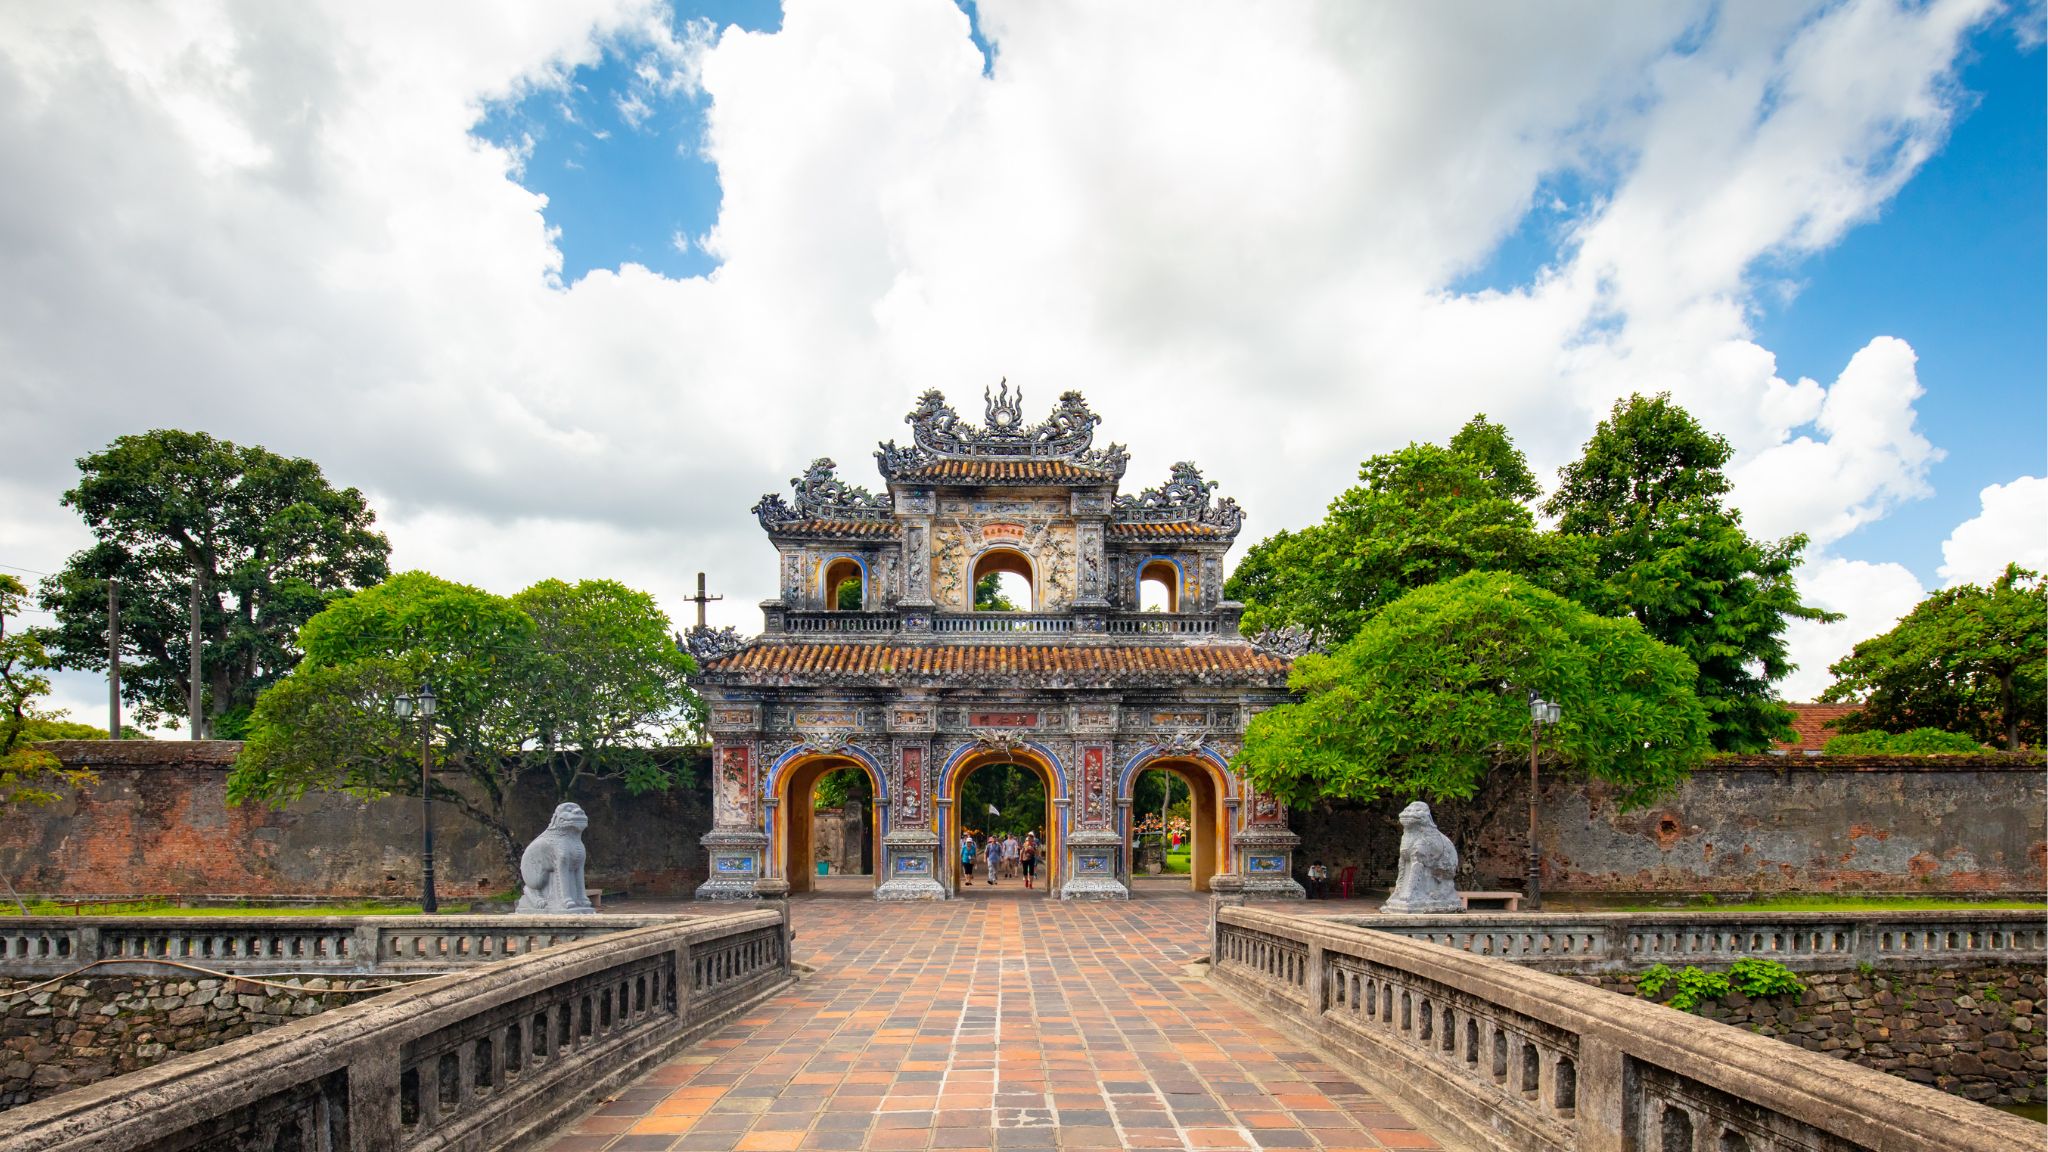 Day 5 Discover Vietnam's History In Imperial Citadel